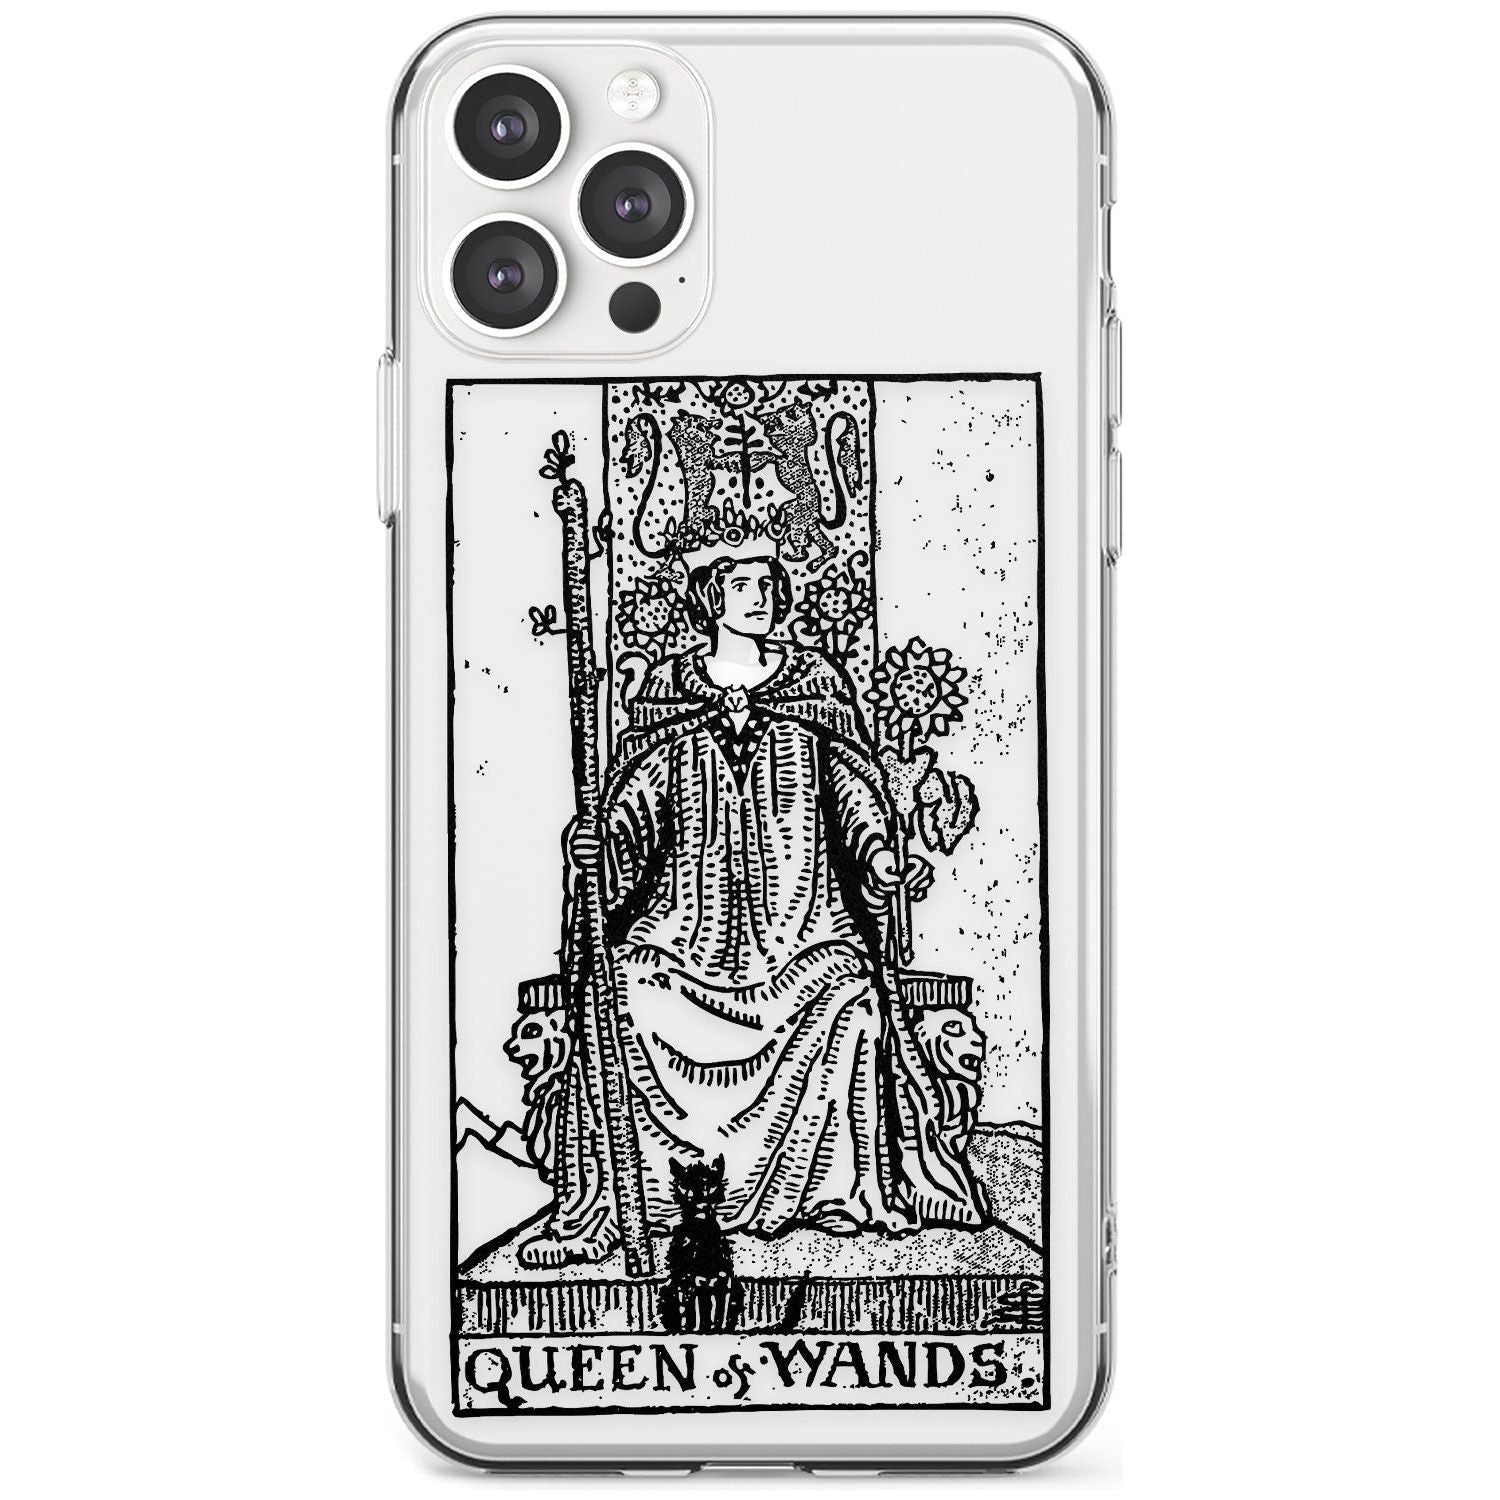 Queen of Wands Tarot Card - Transparent Black Impact Phone Case for iPhone 11 Pro Max